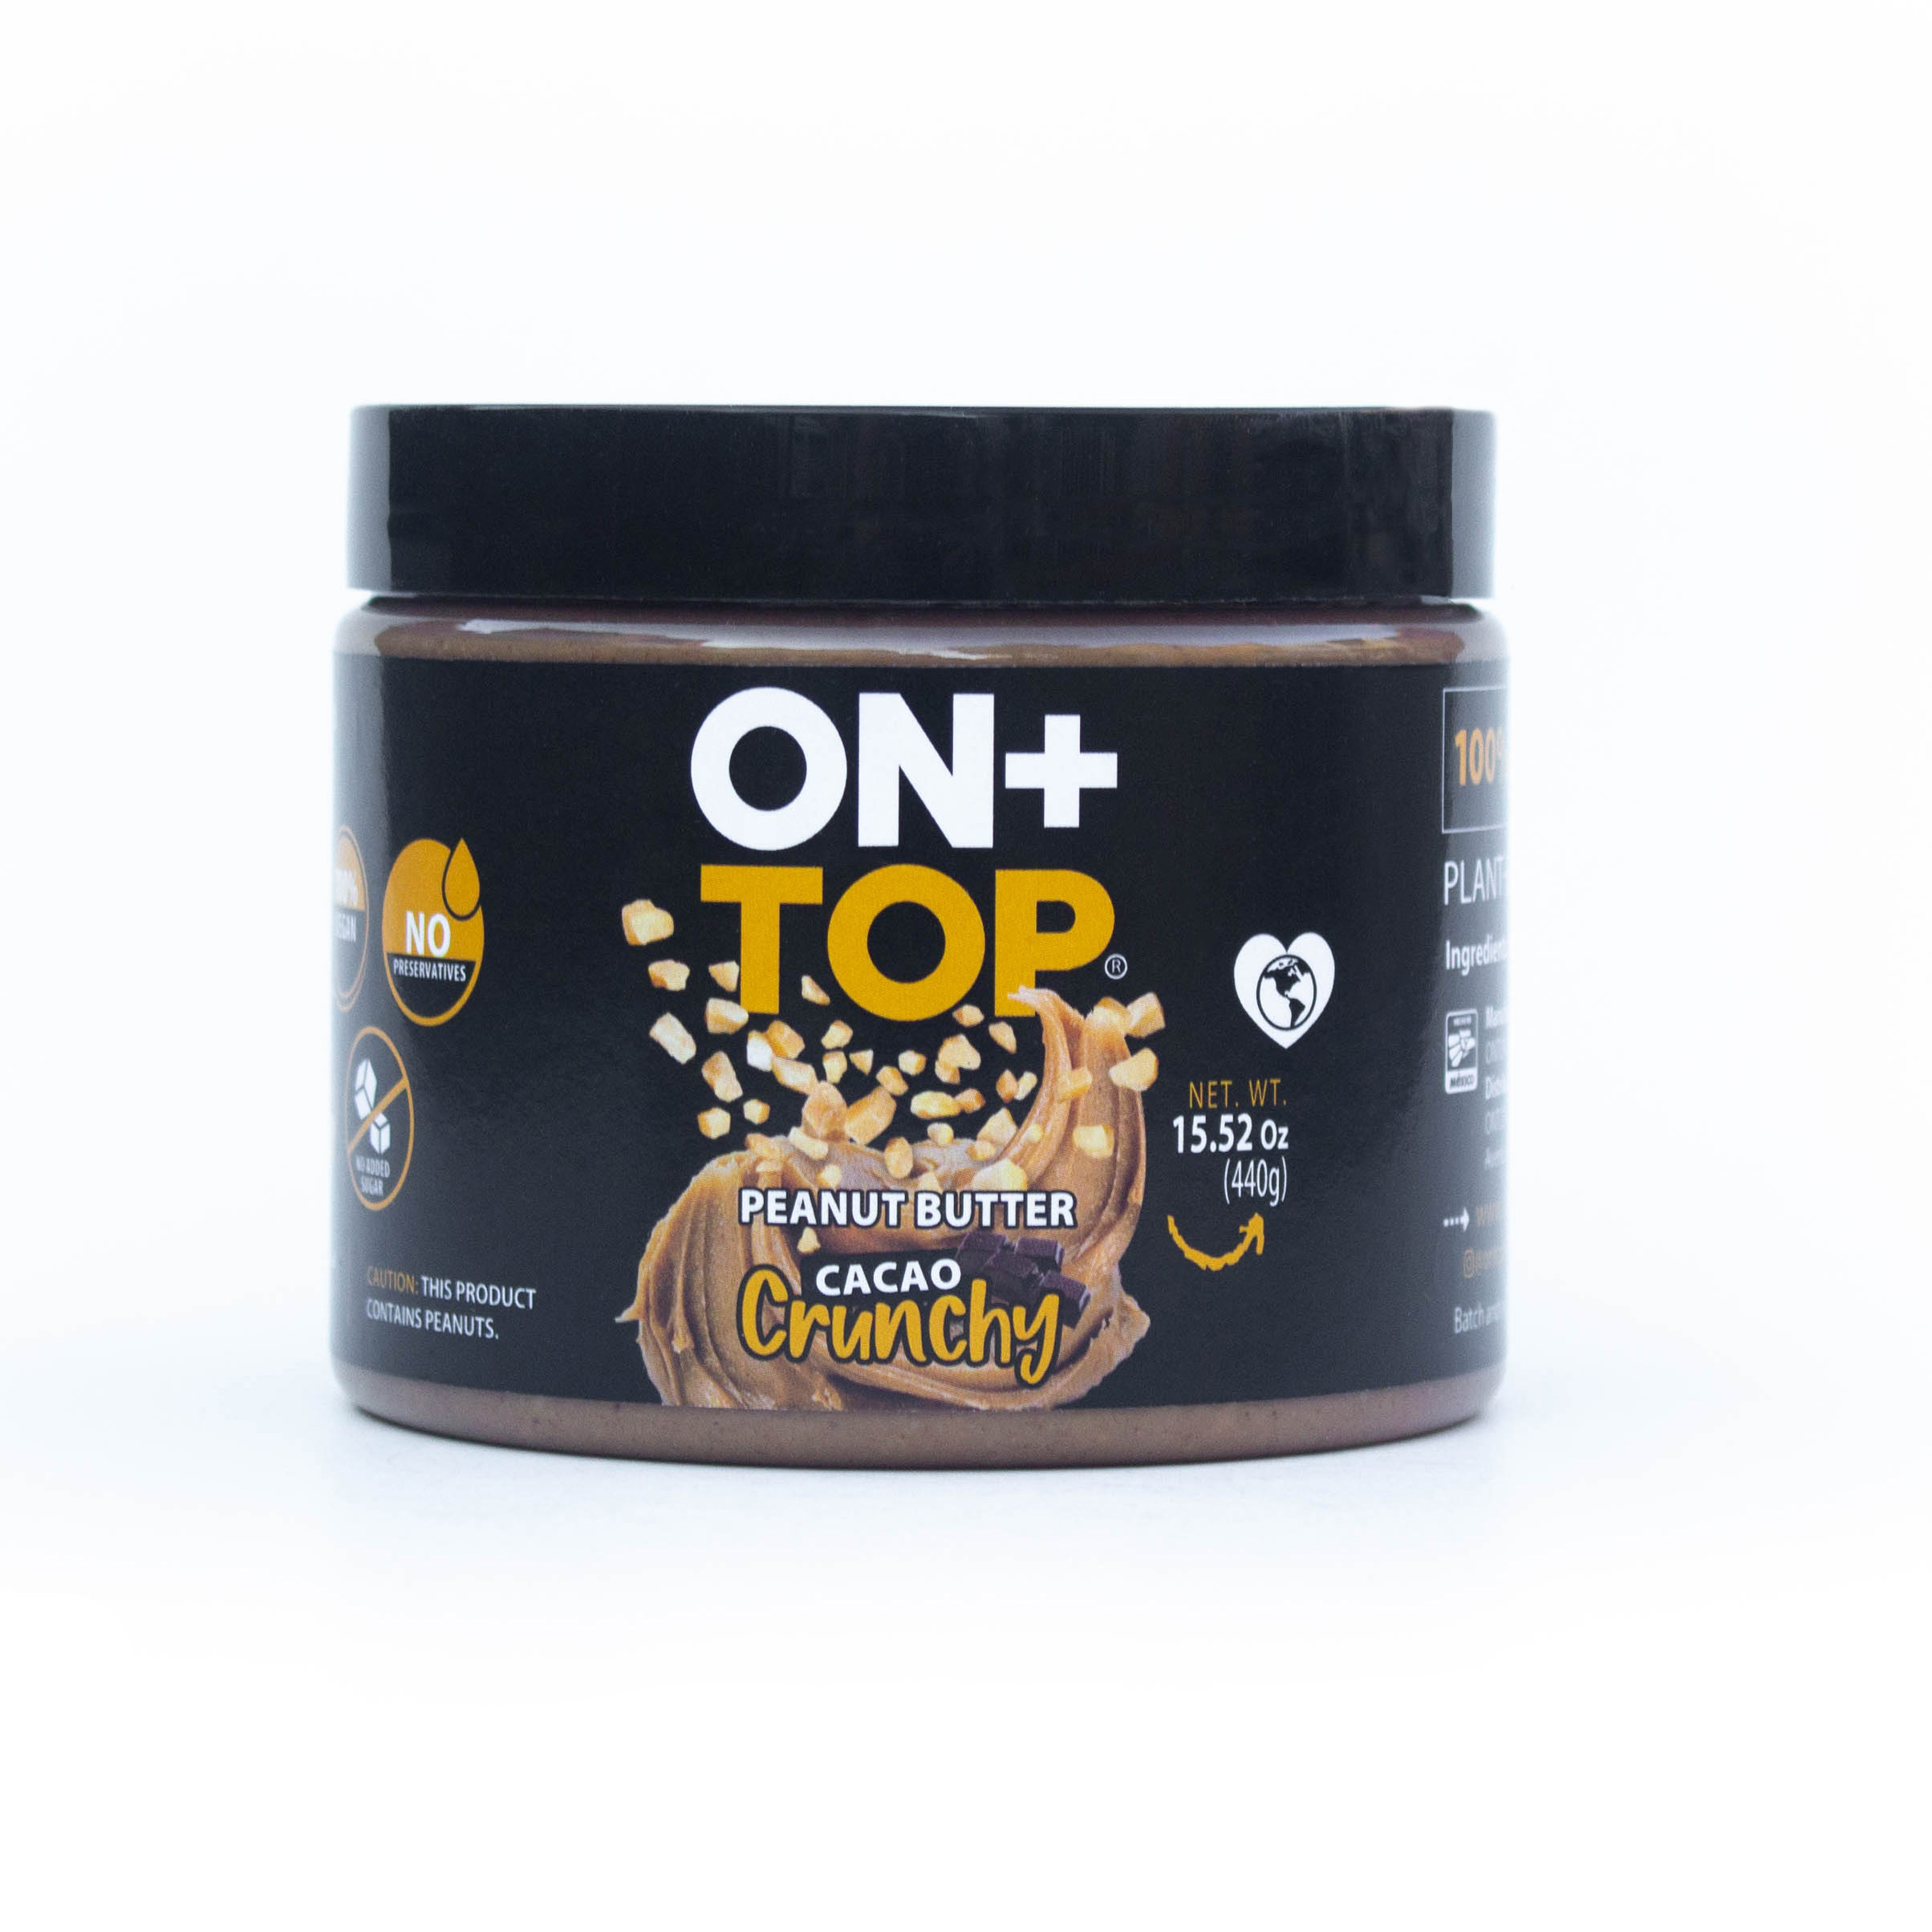 ON+TOP Peanut Butter Cacao Crunchy 6 units per case 440 g